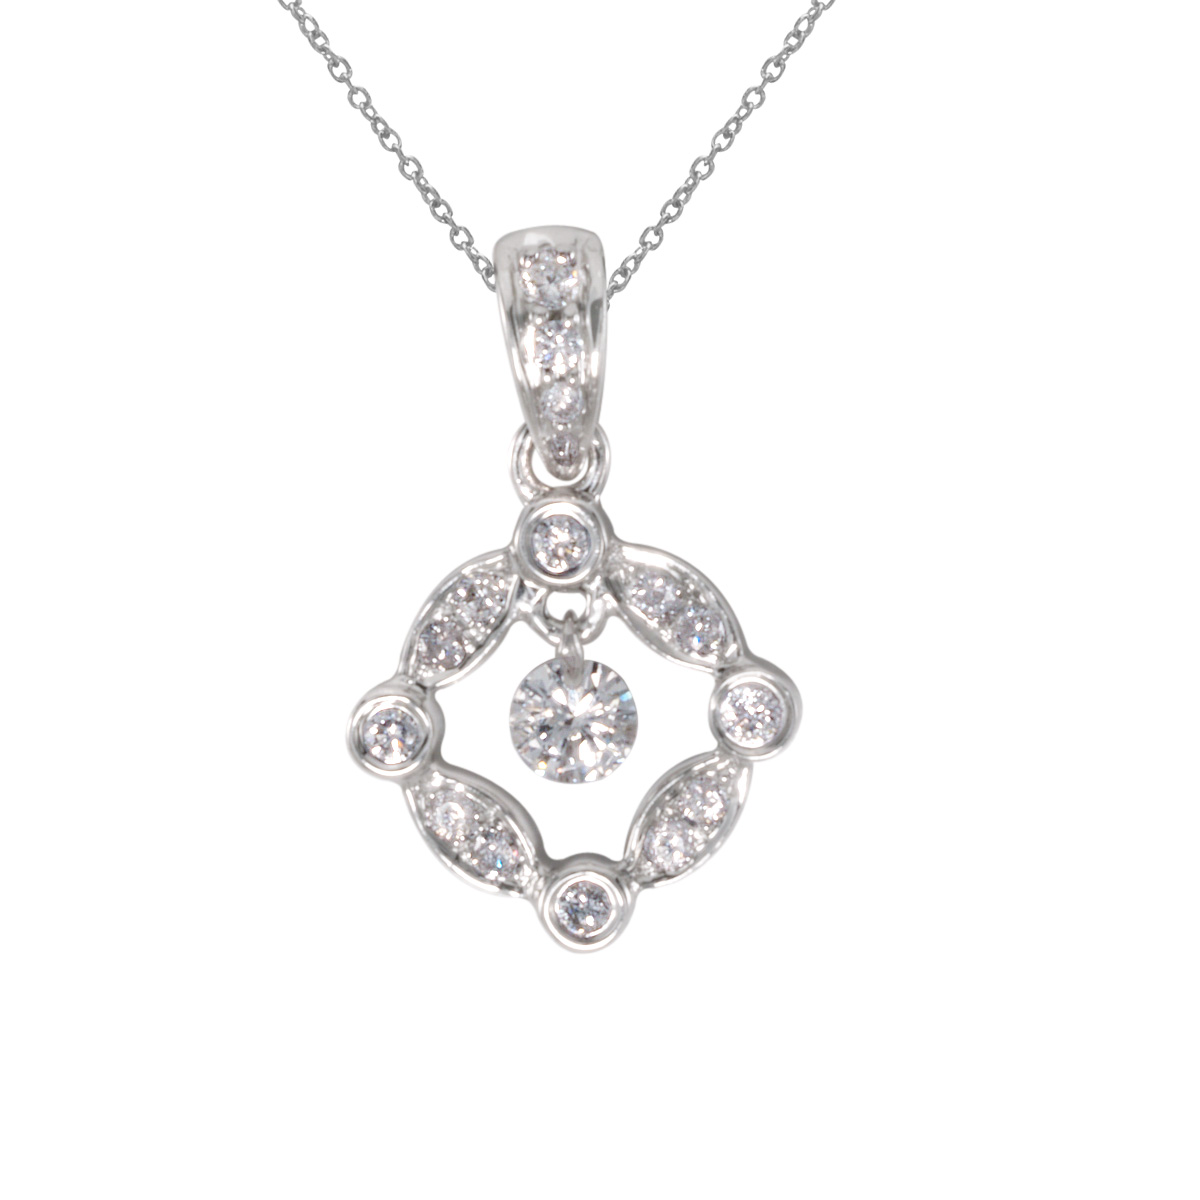 JCX2903: 14k gold Dashinng Diamonds pendant with 0.25 total ct diamonds. The center dangling diamond dances and shimmers with every heartbeat.